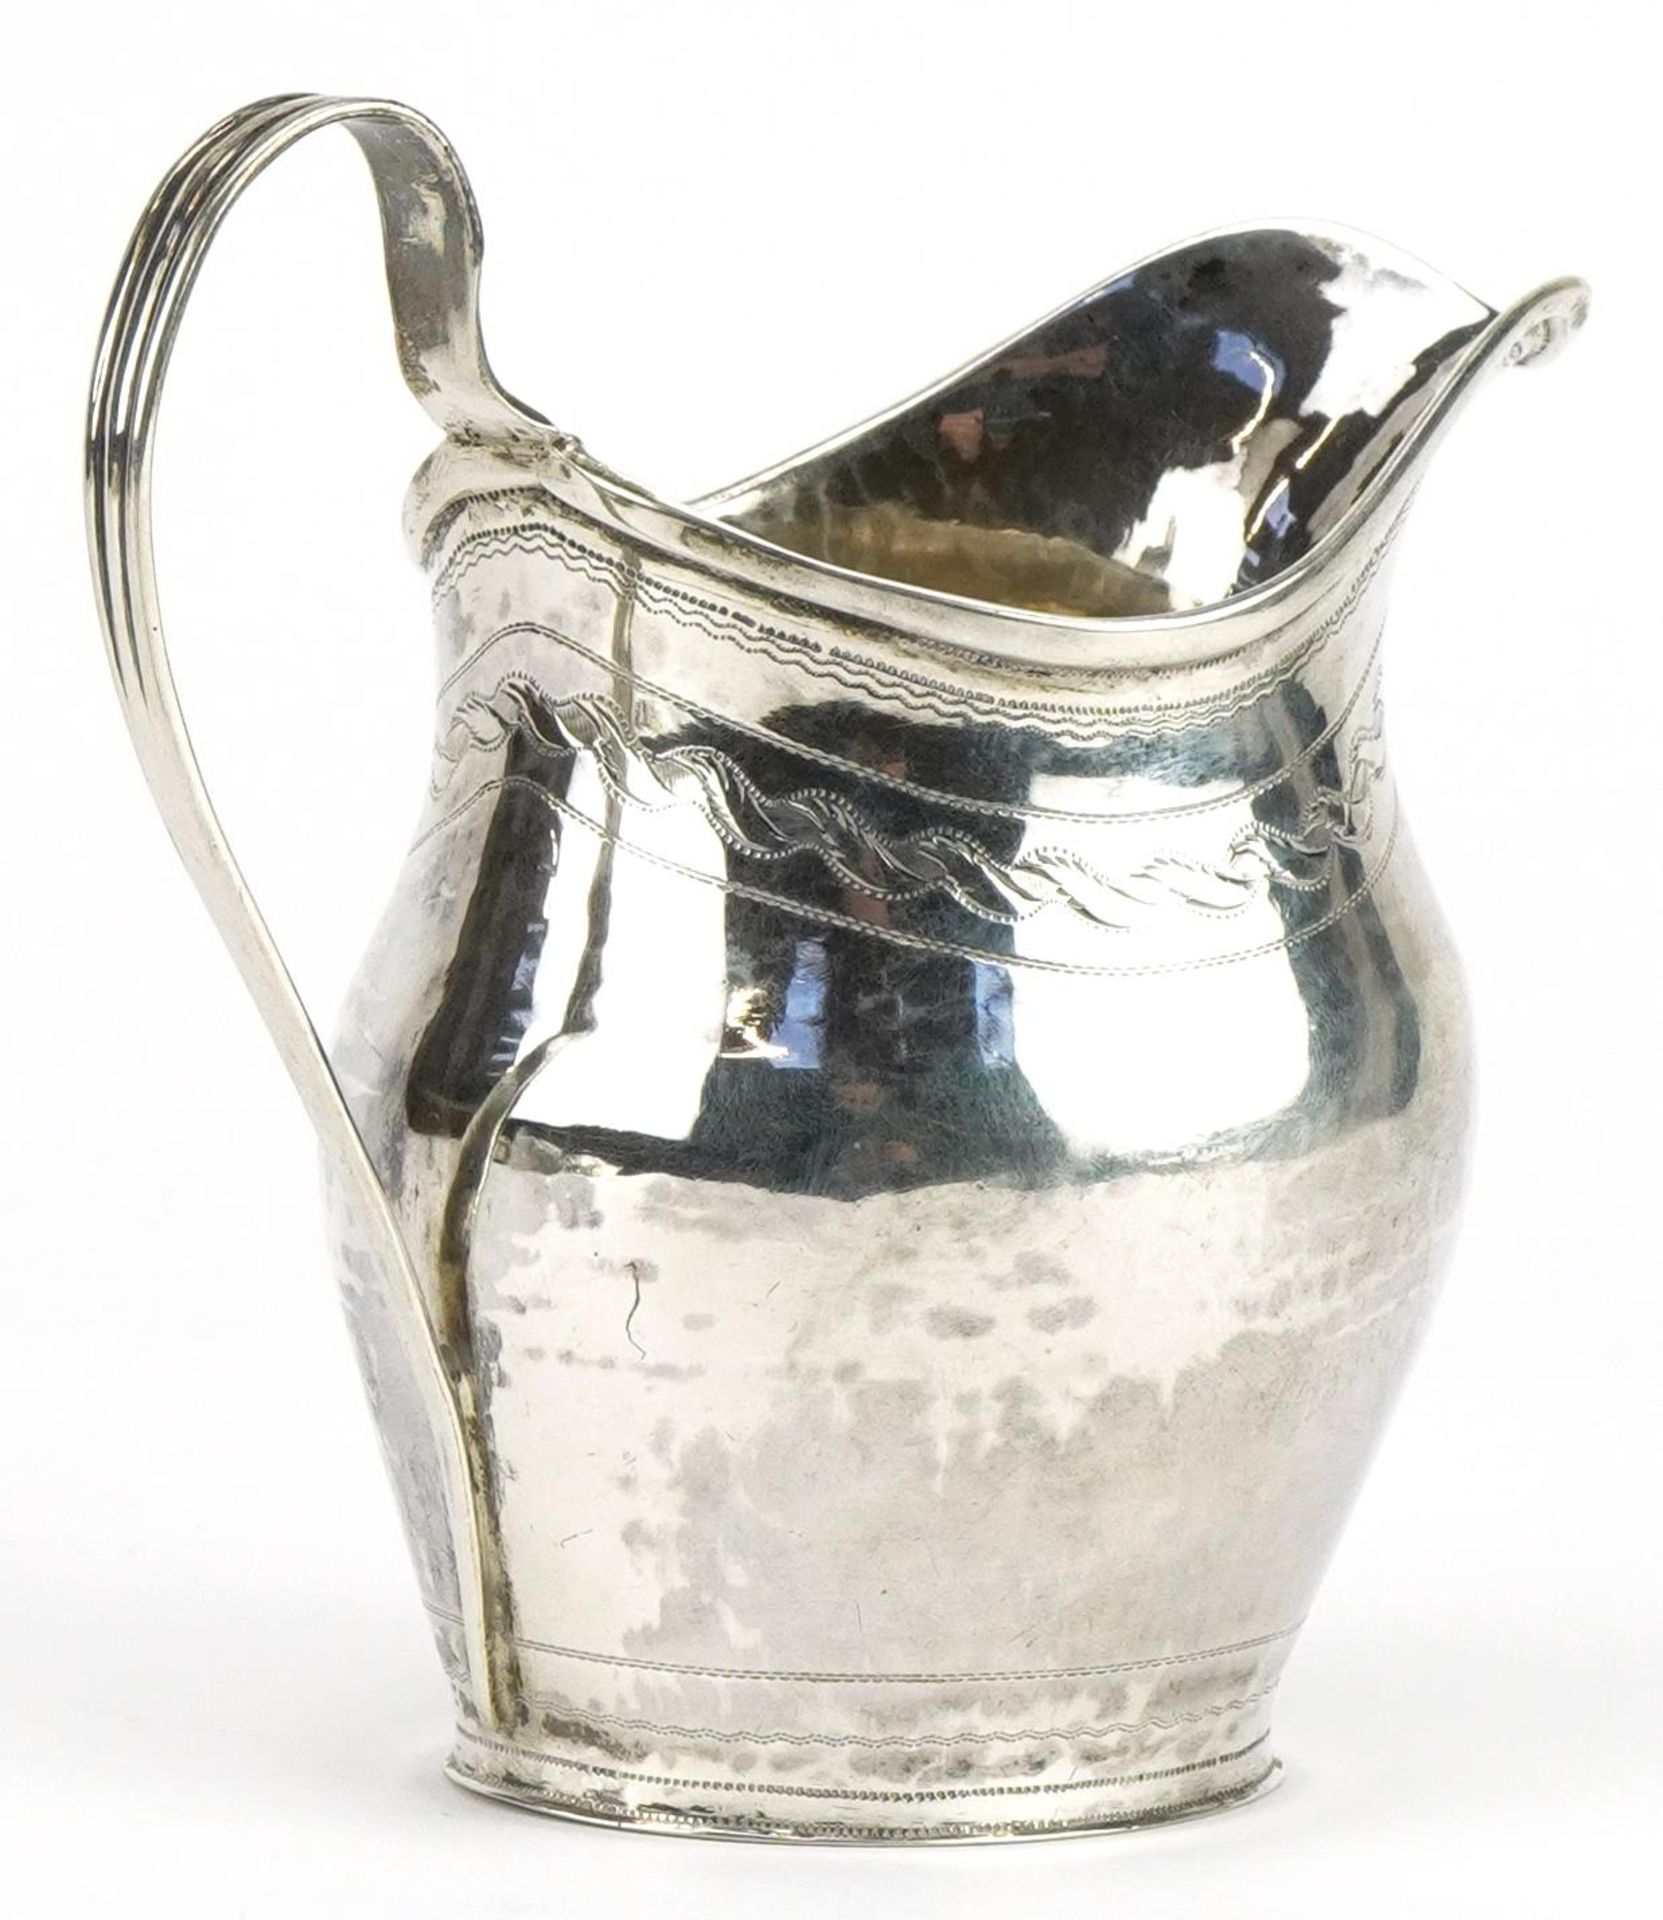 George IV silver cream jug with engraved decoration, indistinct maker's mark, possibly SAB, London - Image 4 of 5